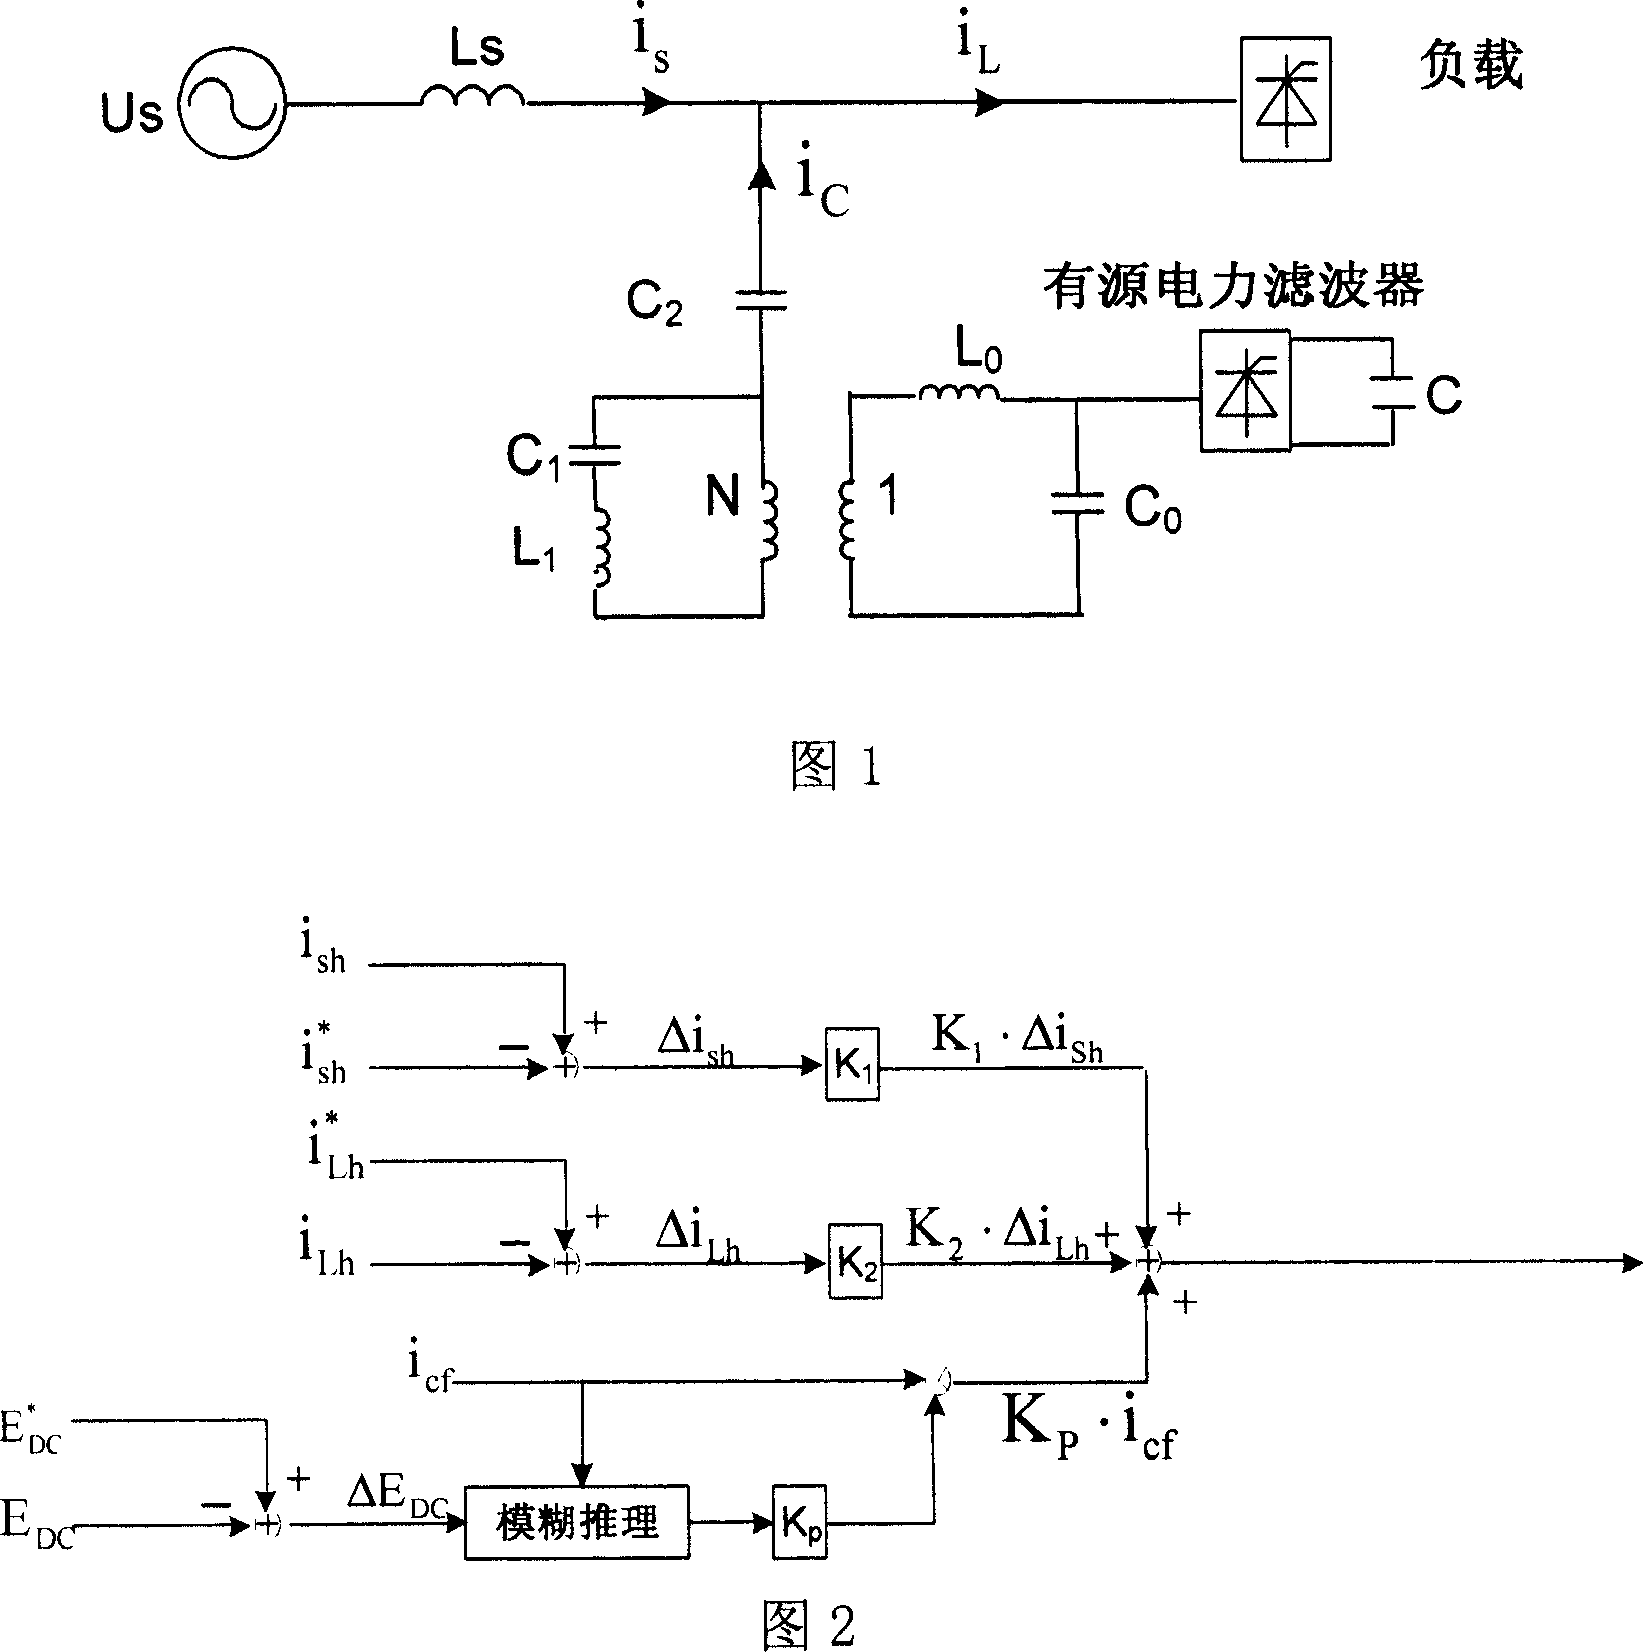 Control method for high-power active filter